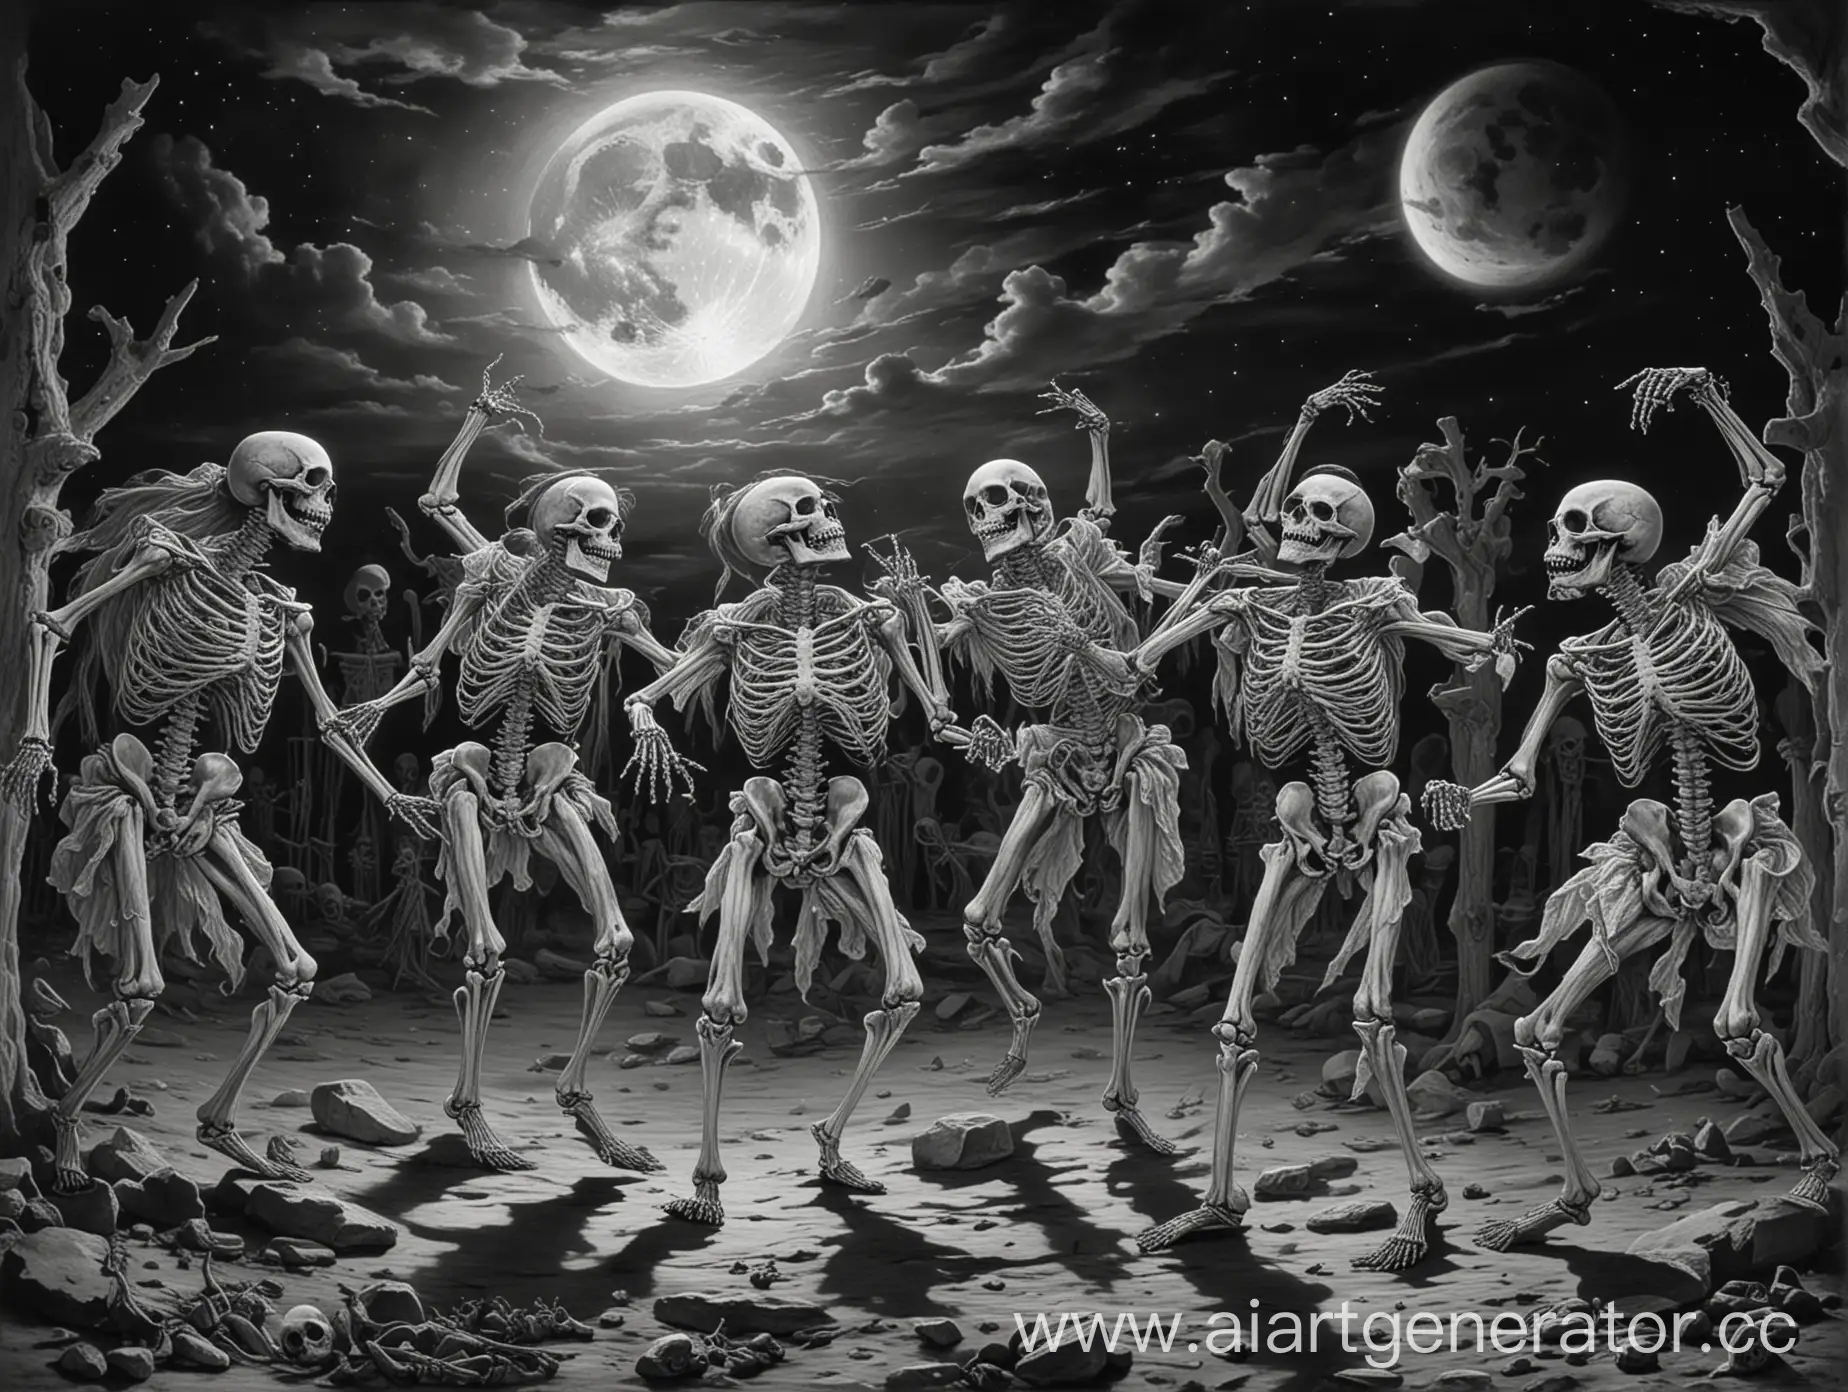 Energetic-Black-and-White-Dance-of-Skeletons-Under-the-Full-Moon